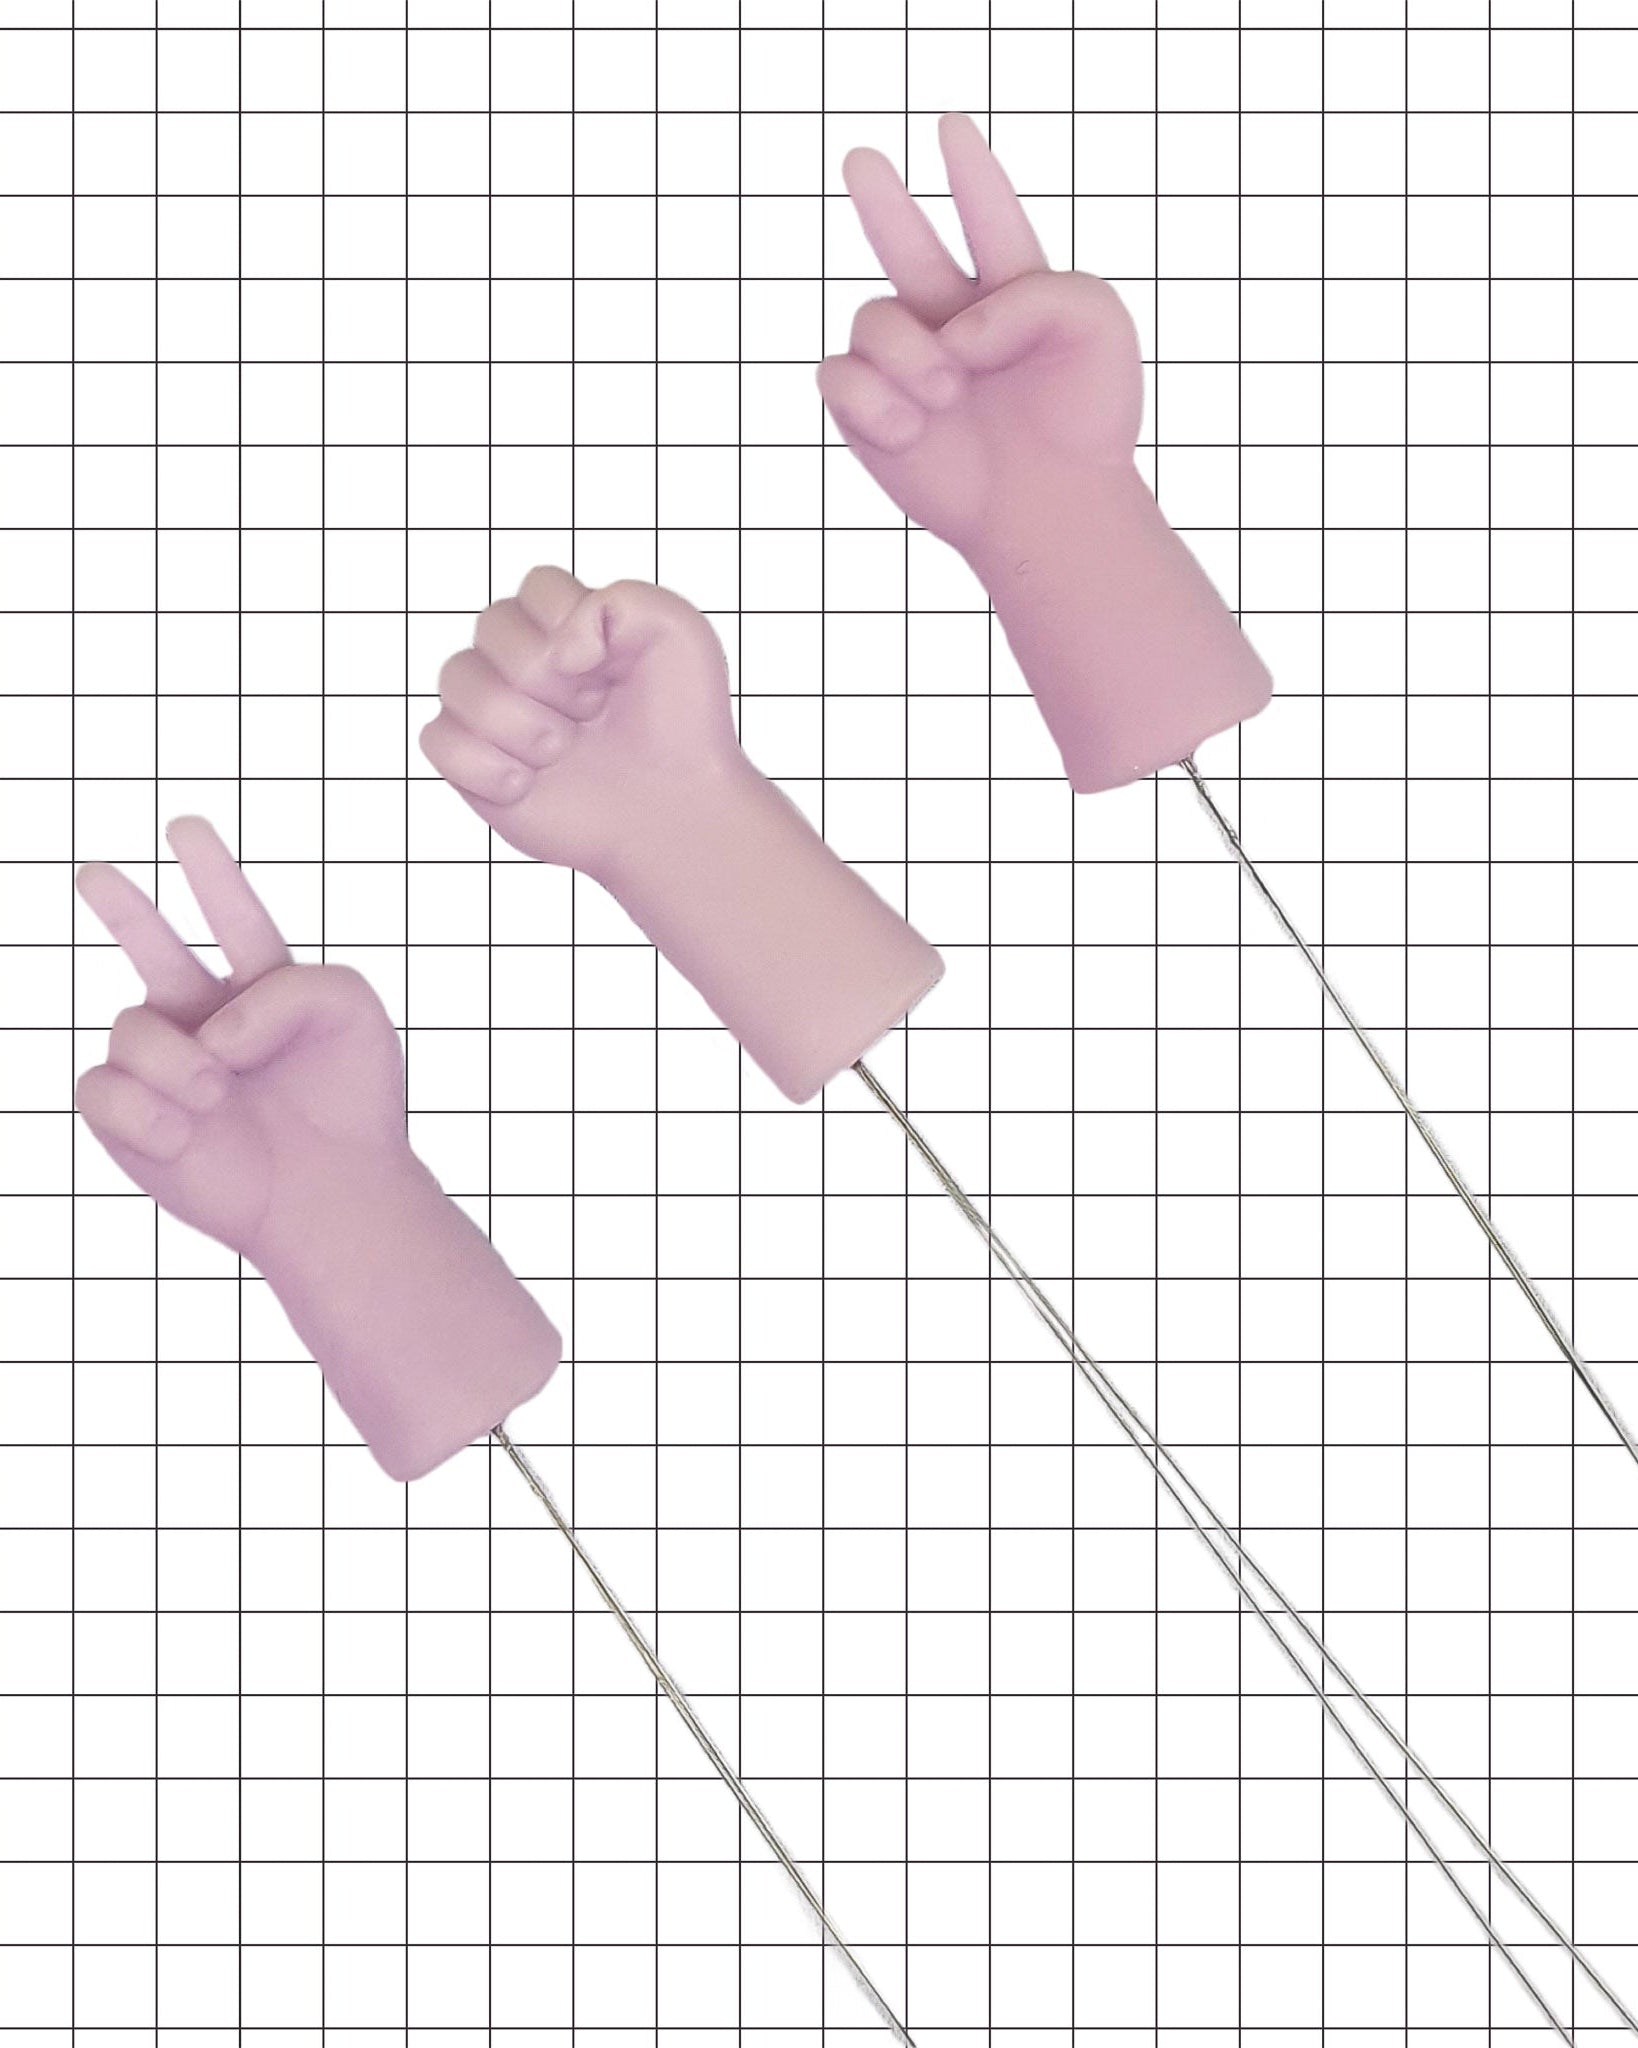 Needle threaders with peace sign hands on white grid background